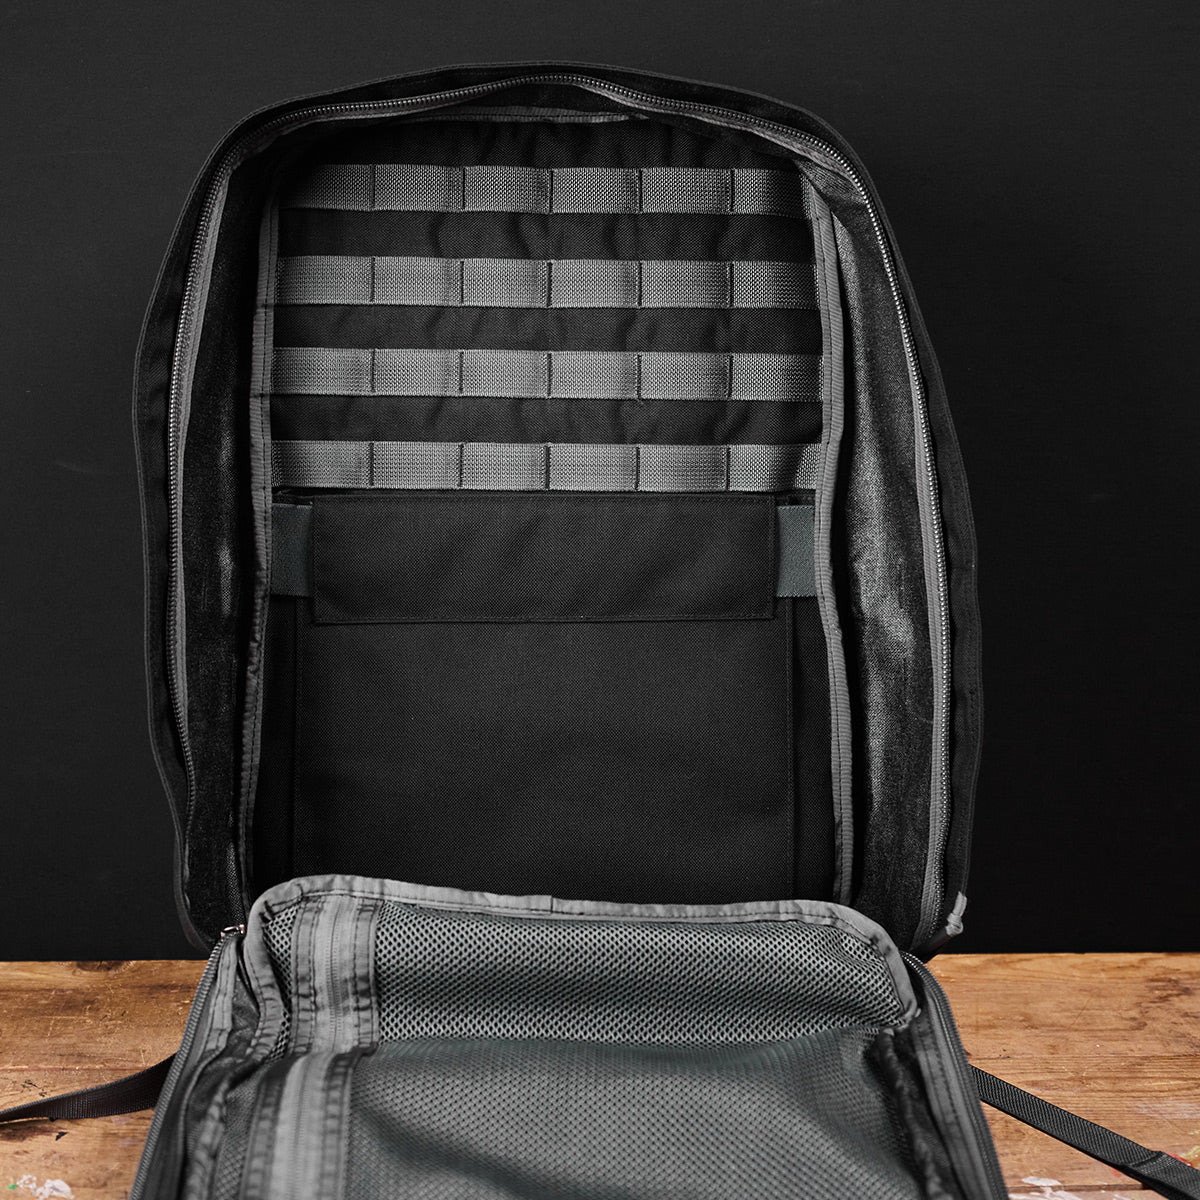 The GORUCK GR2 is a great backpack, but it's a premium backpack. Find out  all the great features that make …